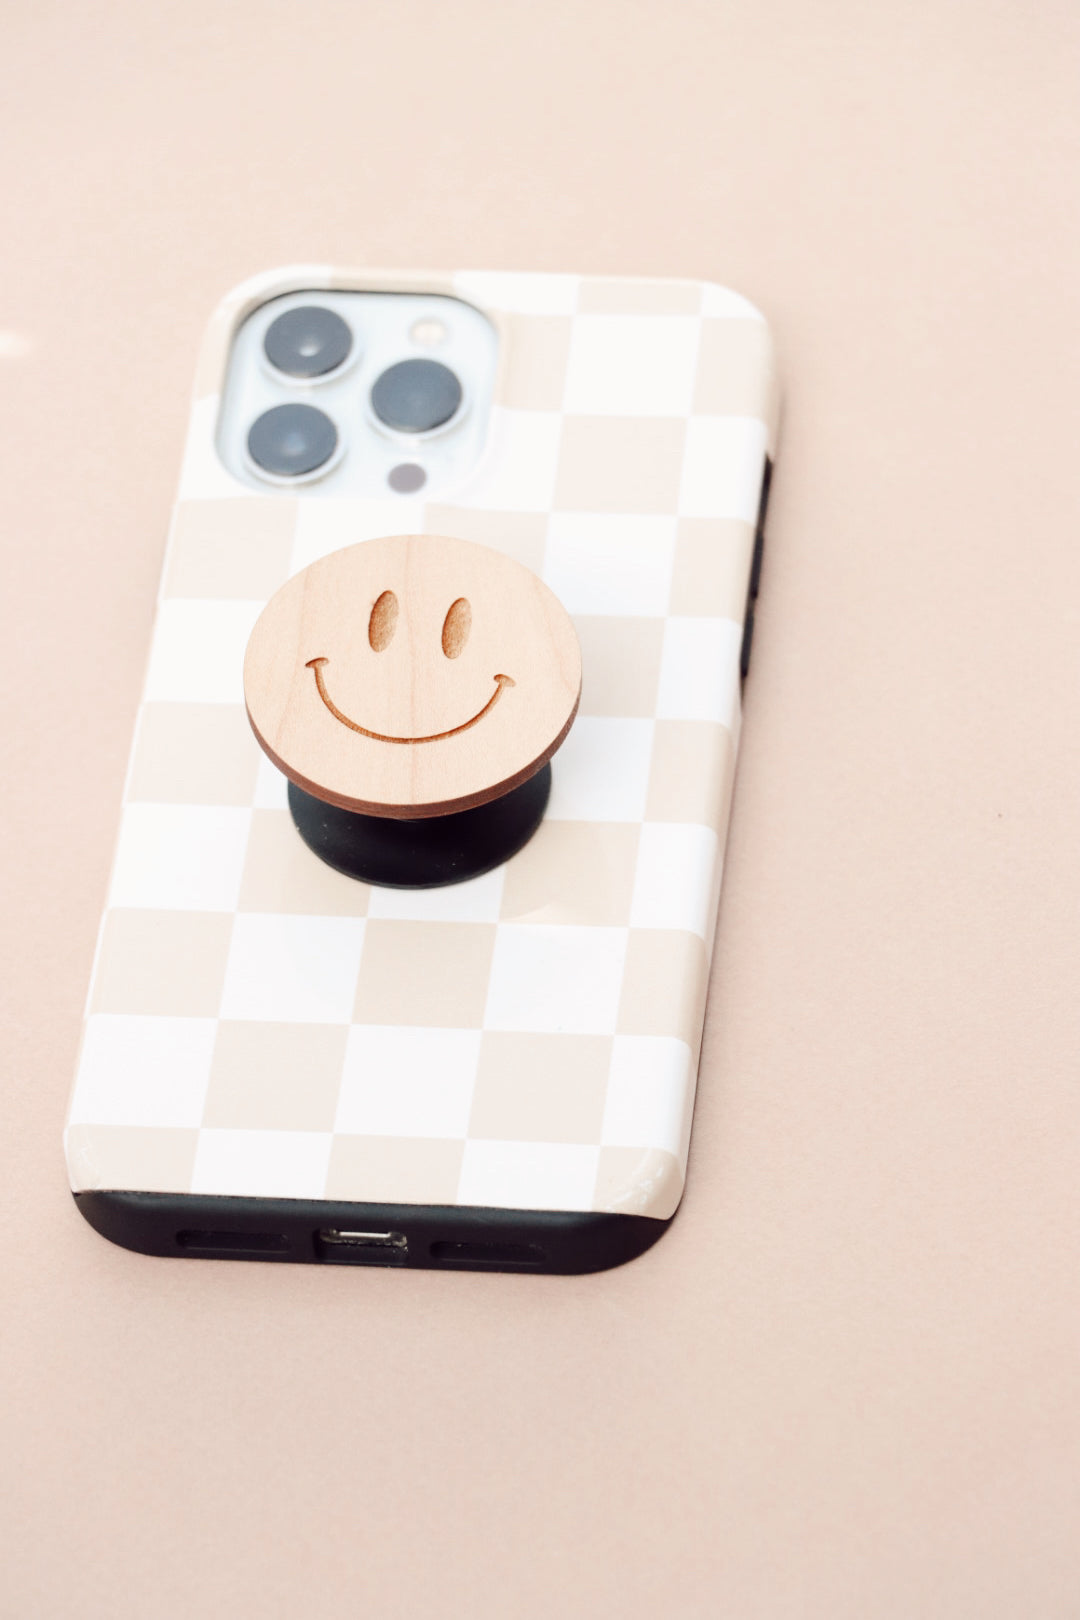 NEW Smiley Face Phone Grip